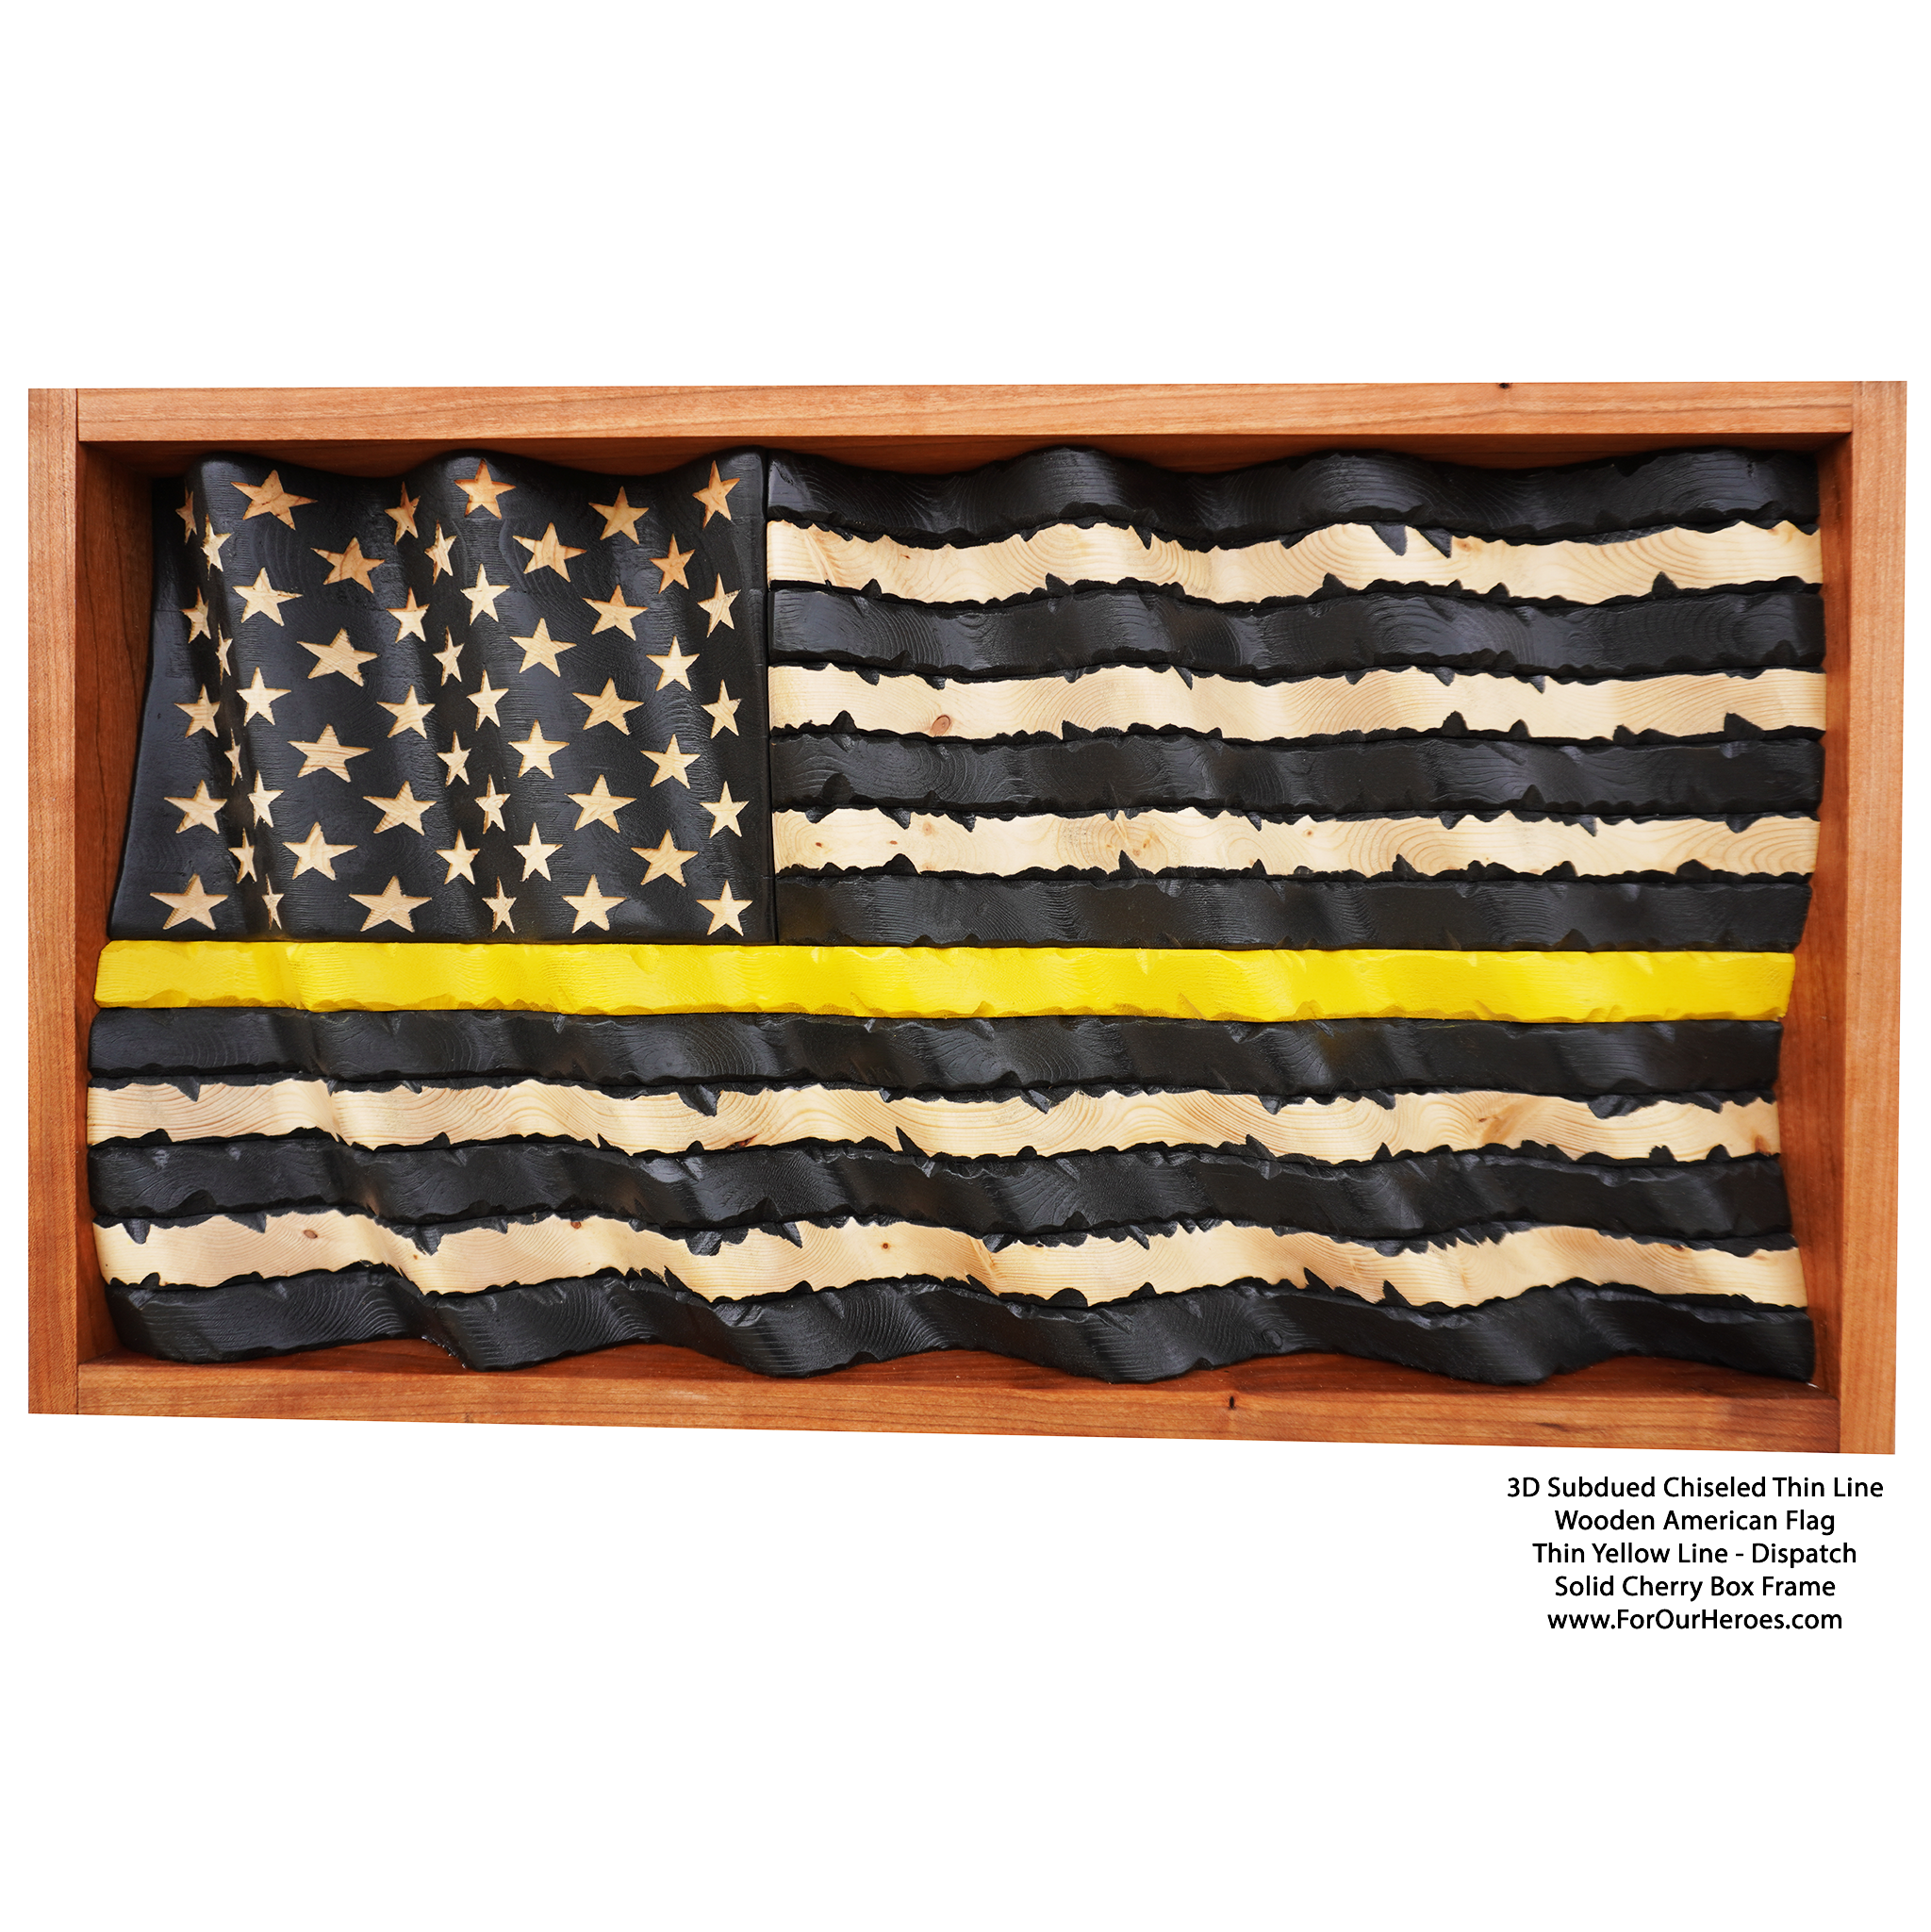 3D SUBDUED CHISELED THIN LINE American Flag (carved stars)